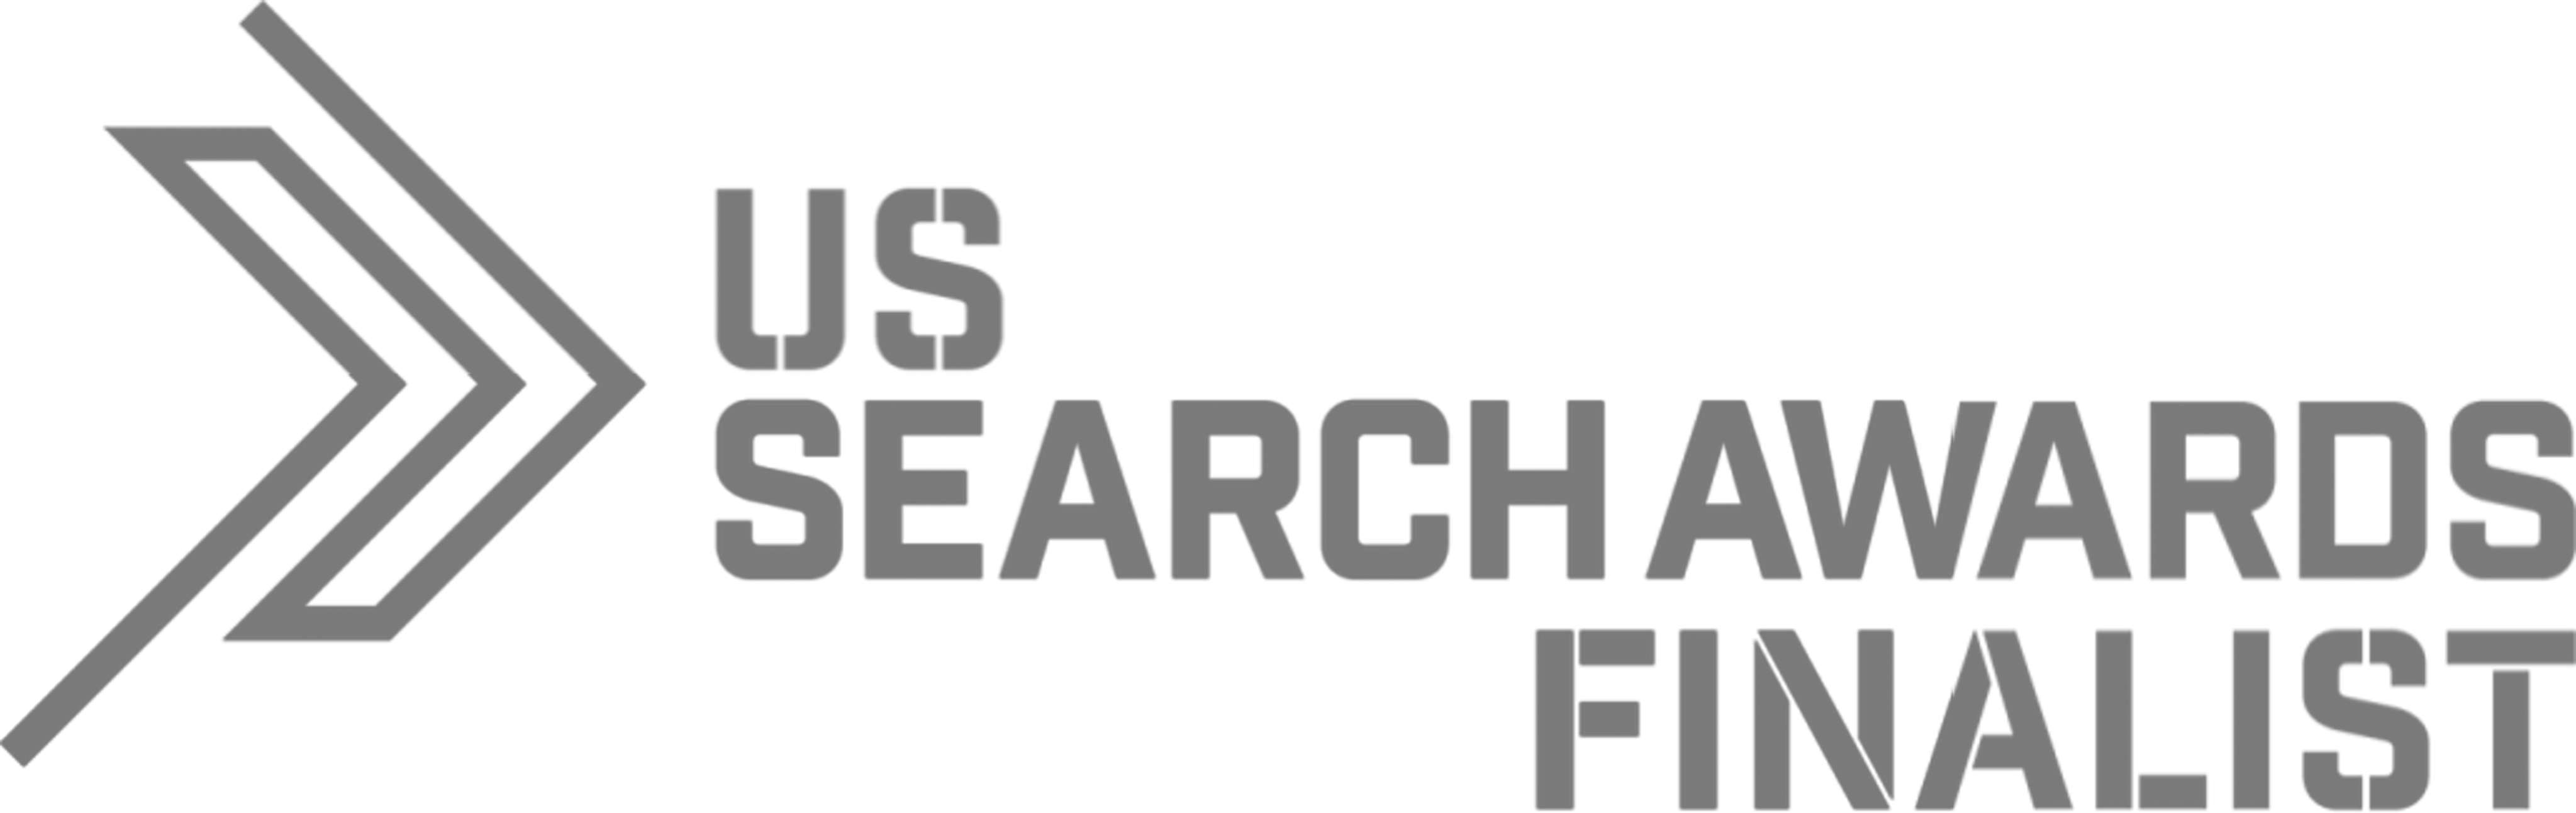 US Search Awards finalist